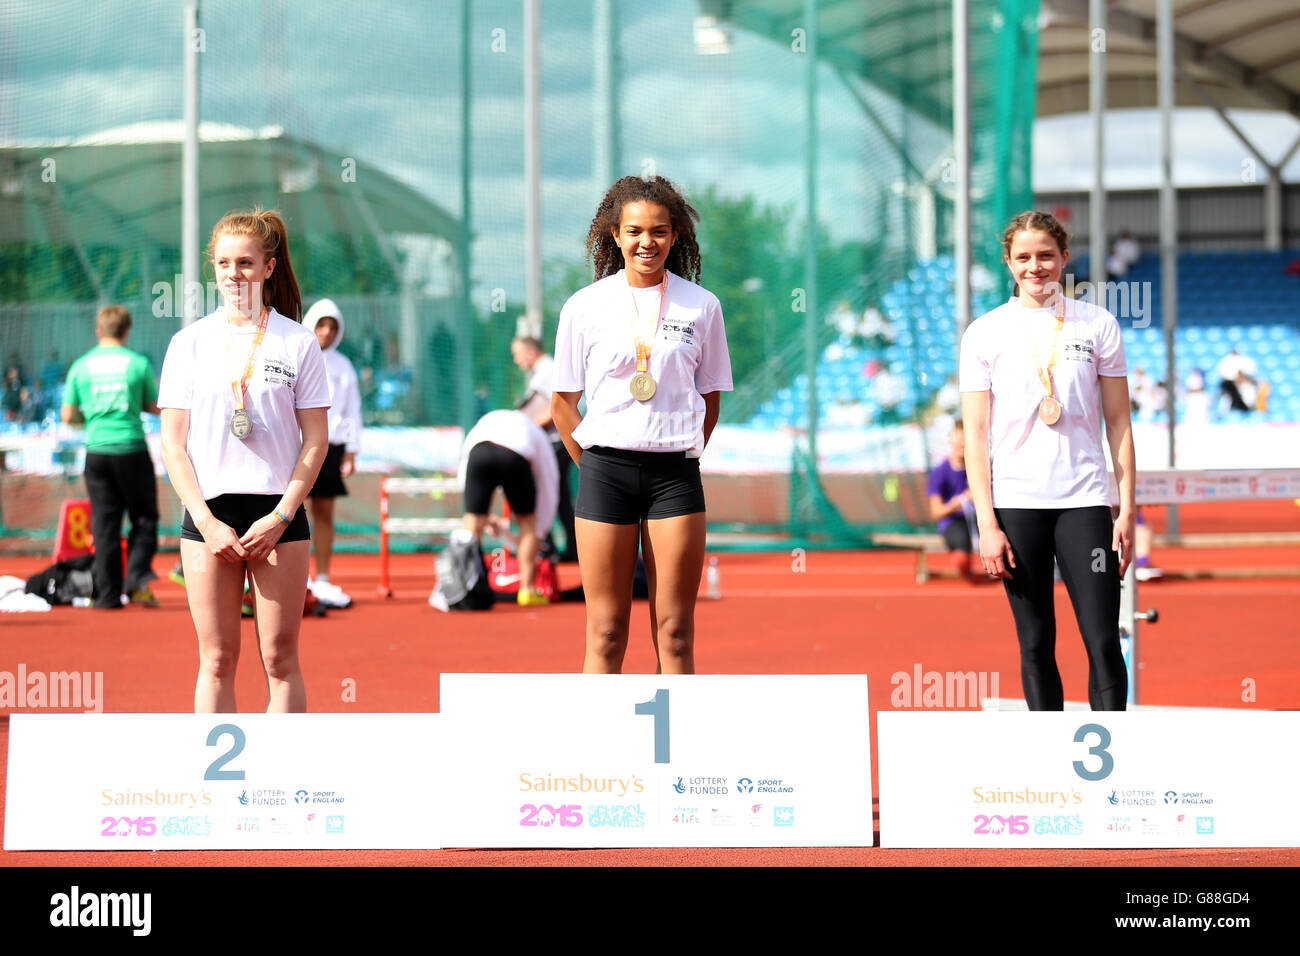 (l-r) England South West's Anna Croft, England North West's Chloe Esegbona and England Midlands' Danel Jansen Van Rensburg receive their girls 300m hurdles medals during the medal ceremony at the Sainsbury's 2015 School Games at the Manchester Regional Arena. Stock Photo